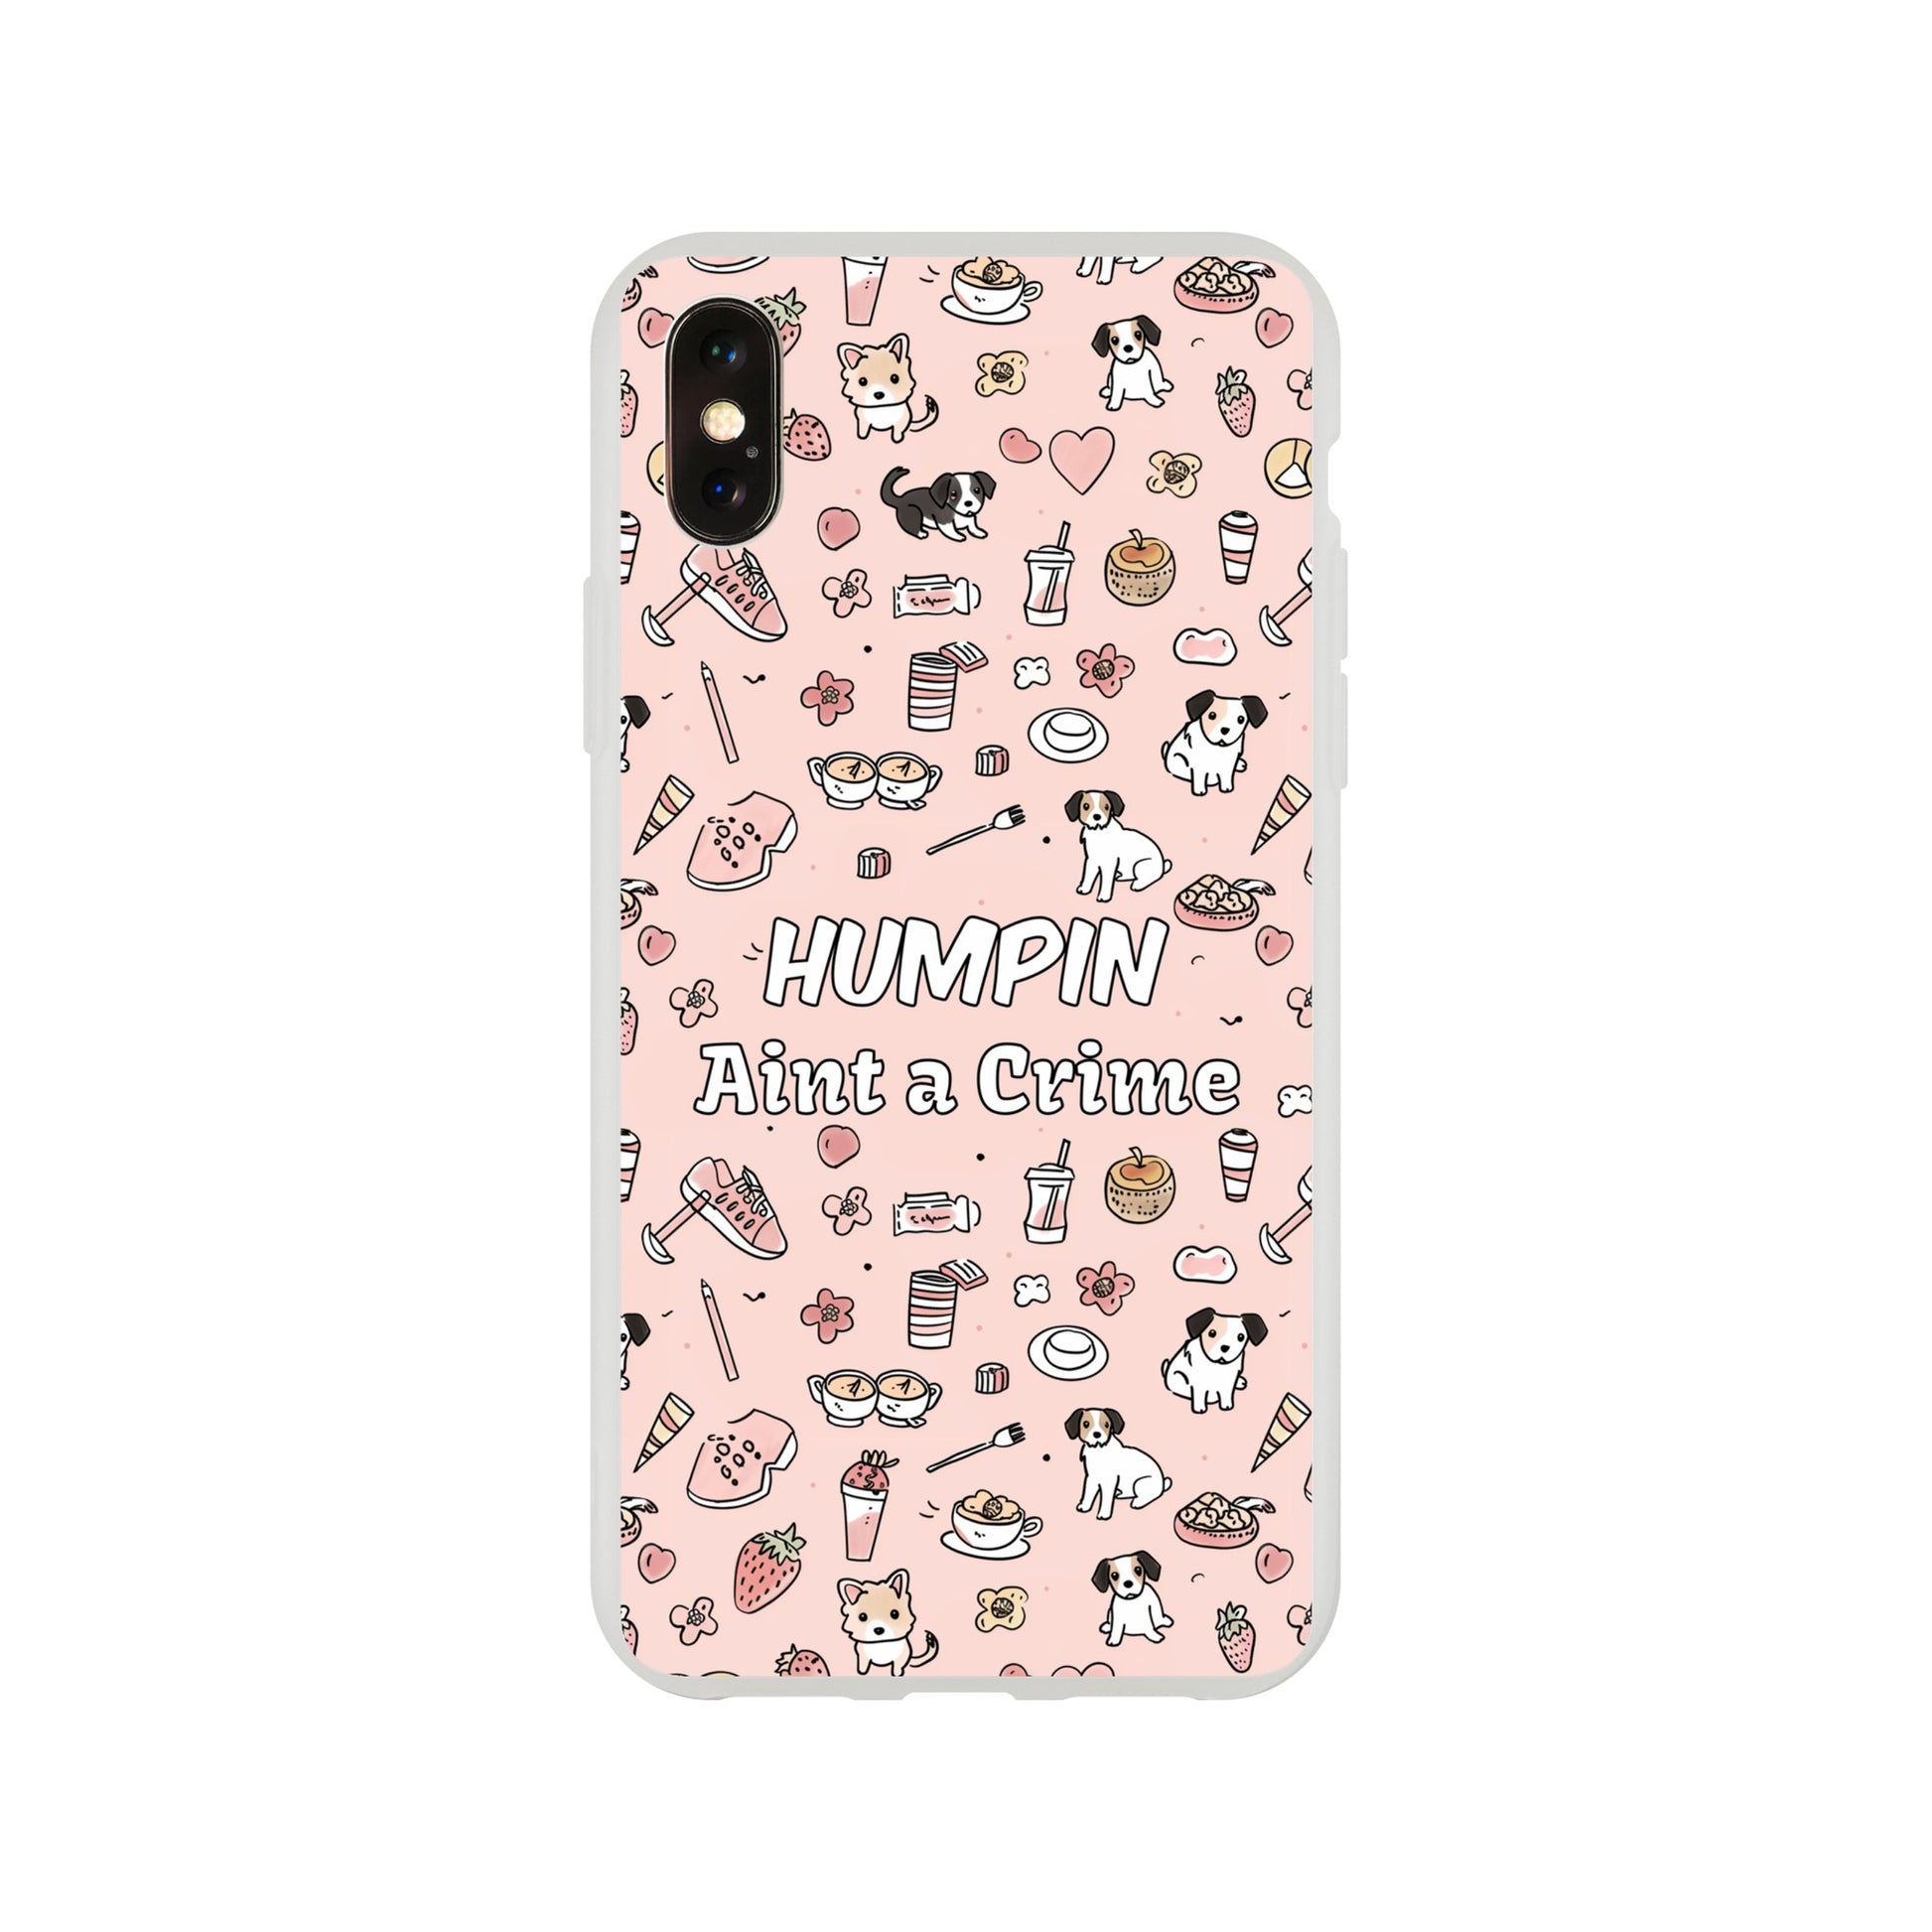 Humpin Aint a Crime - Frosty transparent soft case - Bananas ´n Peaches